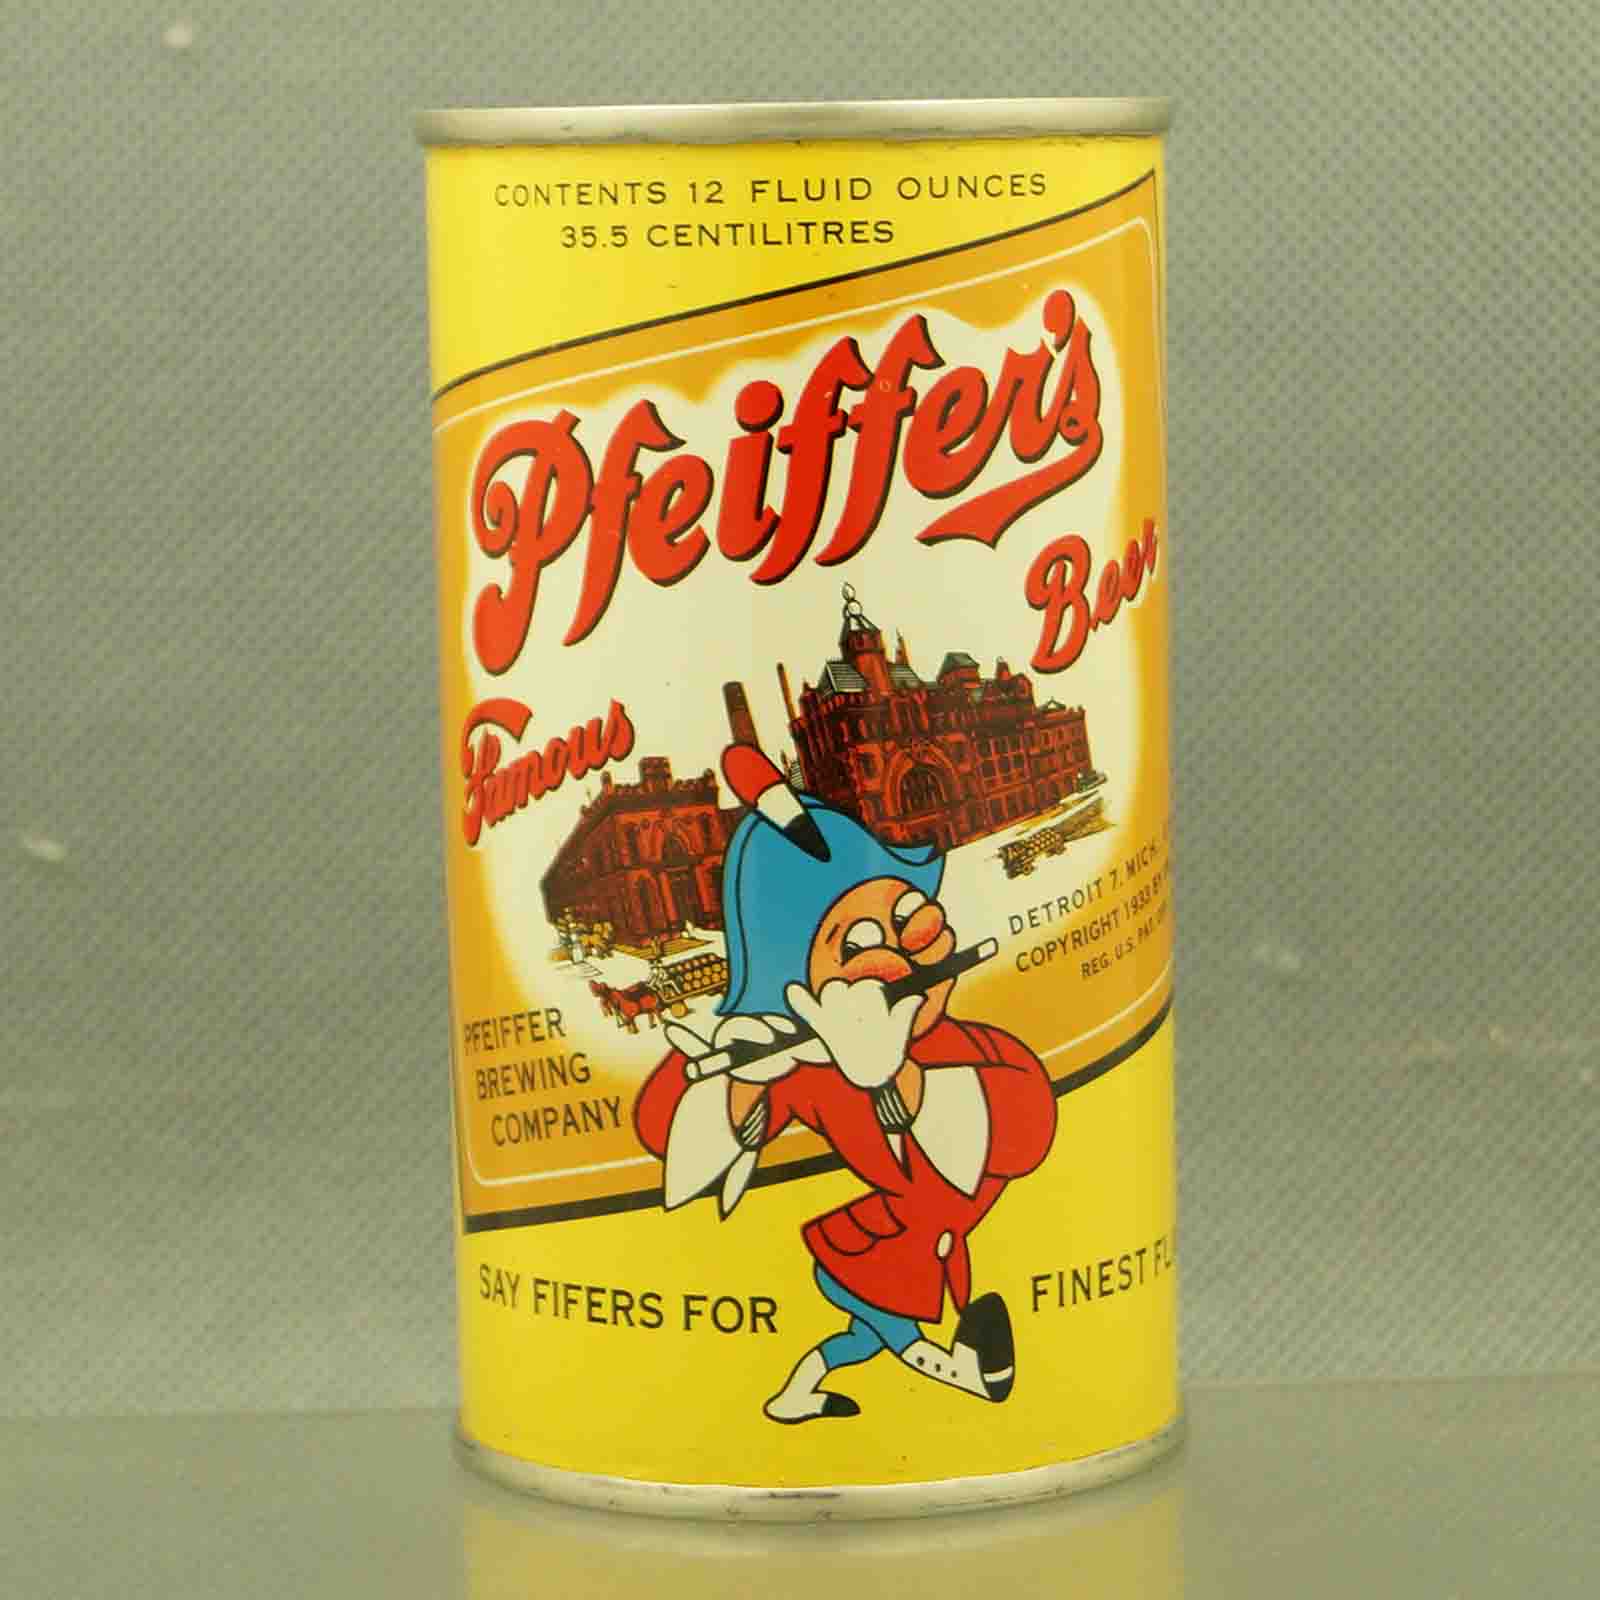 pfeiffers 114-1 flat top beer can 1